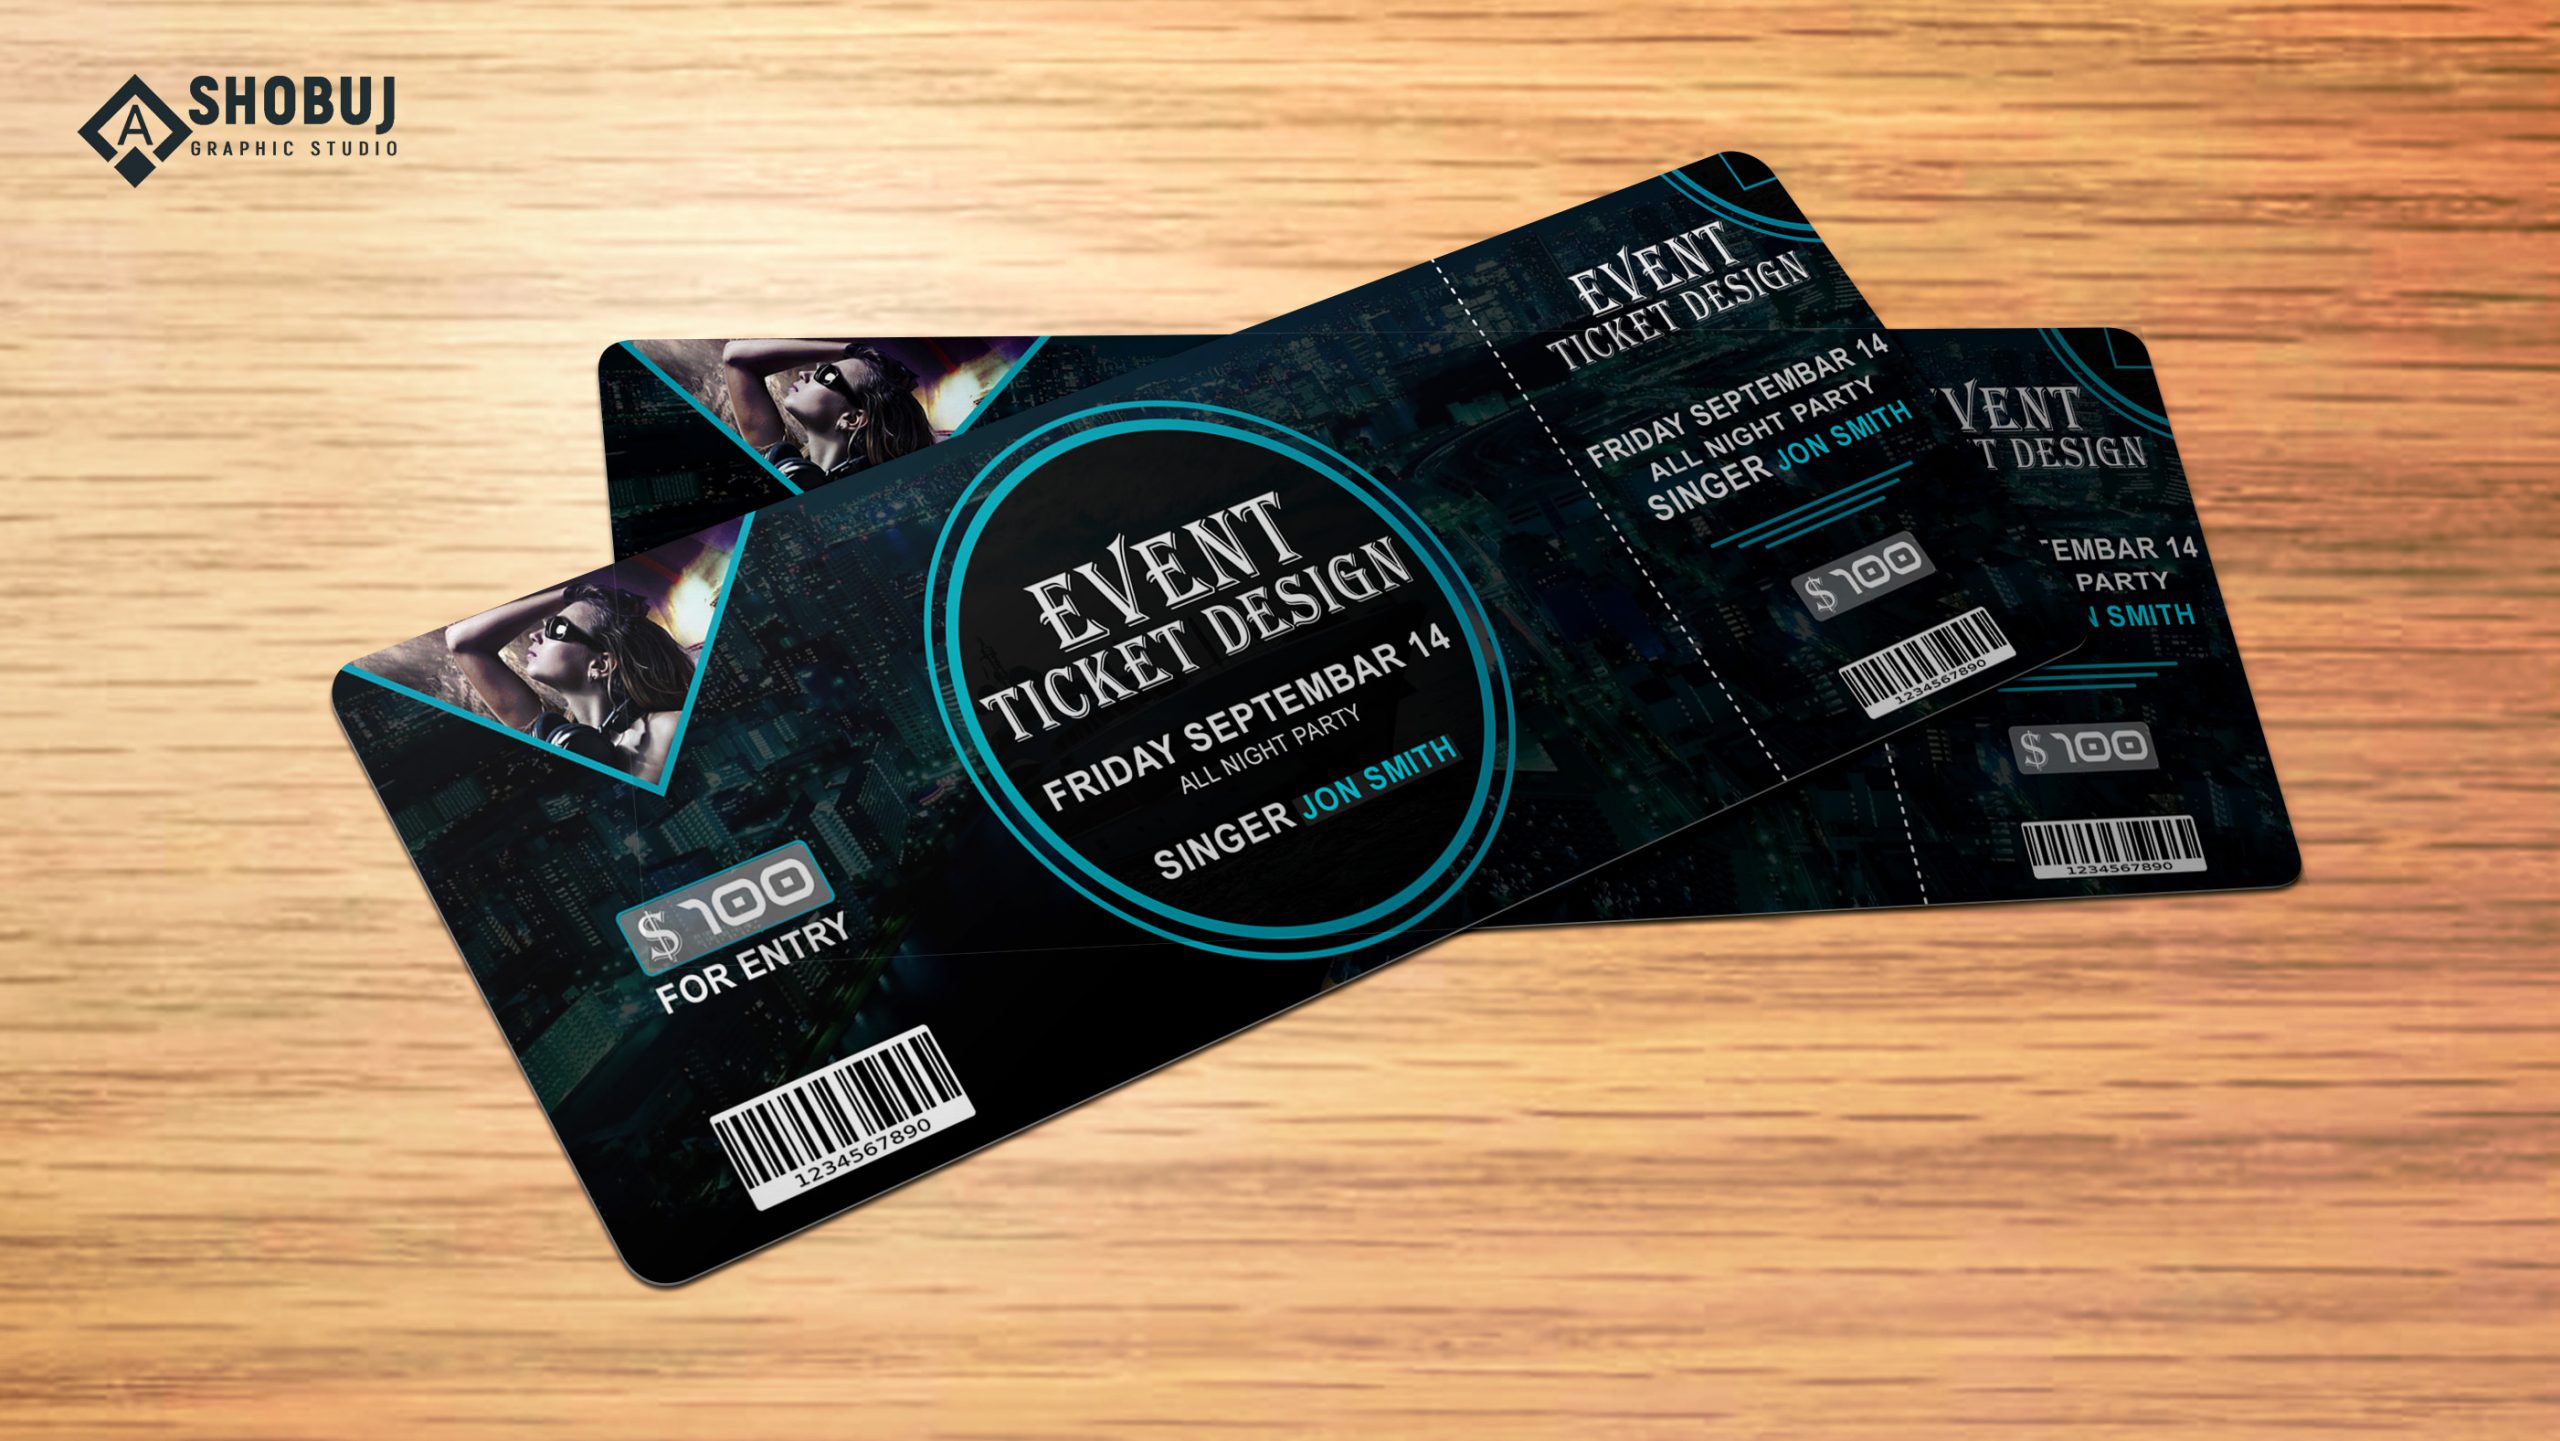 Carnival Printable Ticket Templates